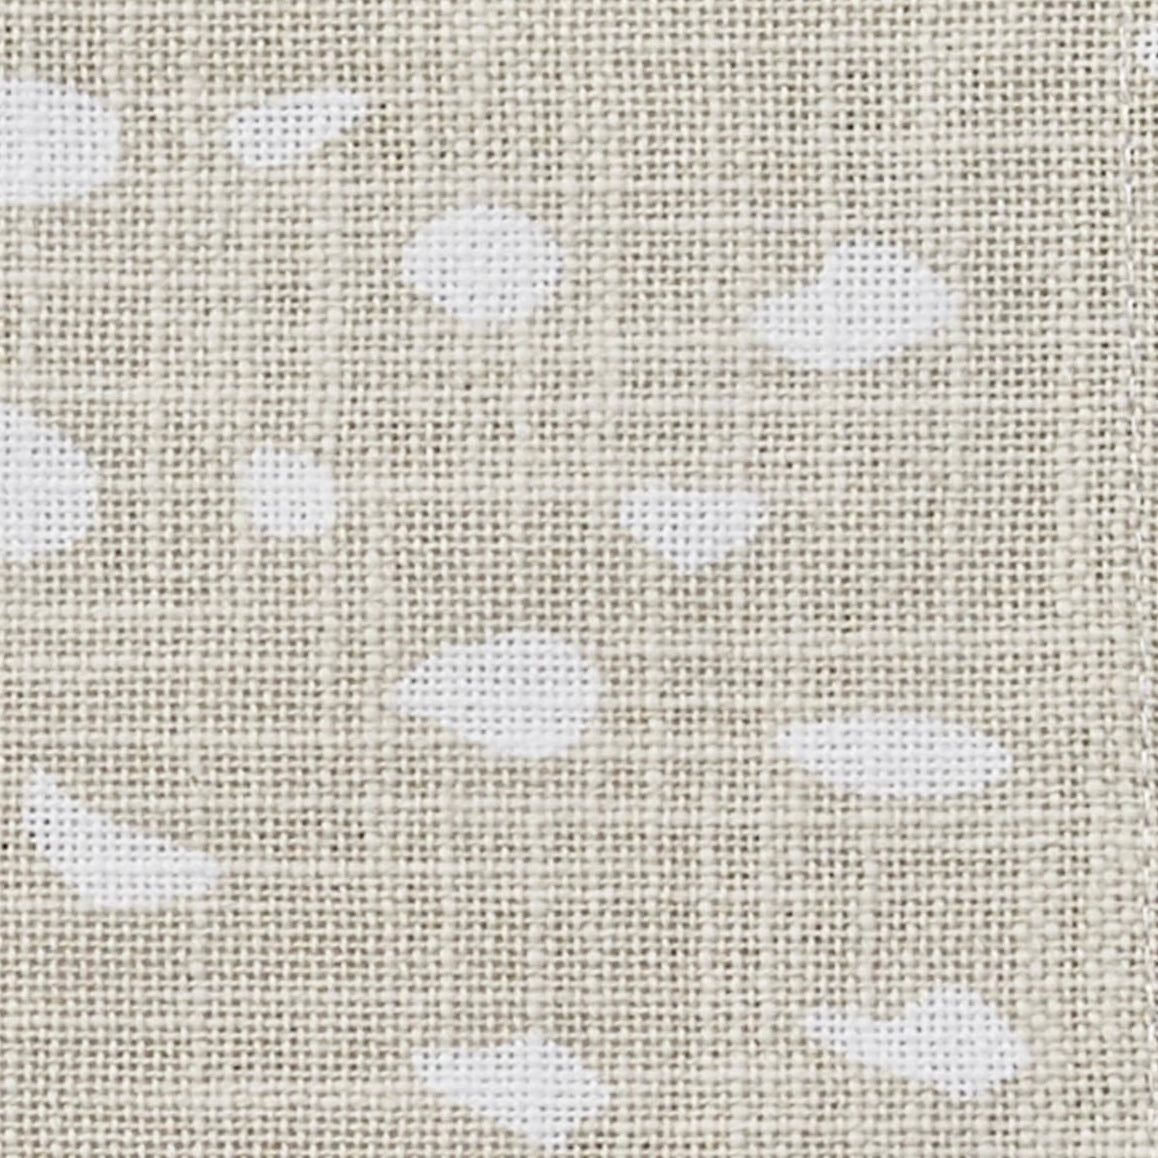 A close up of the fawn spotted pattern on the Fawn Print Napkins